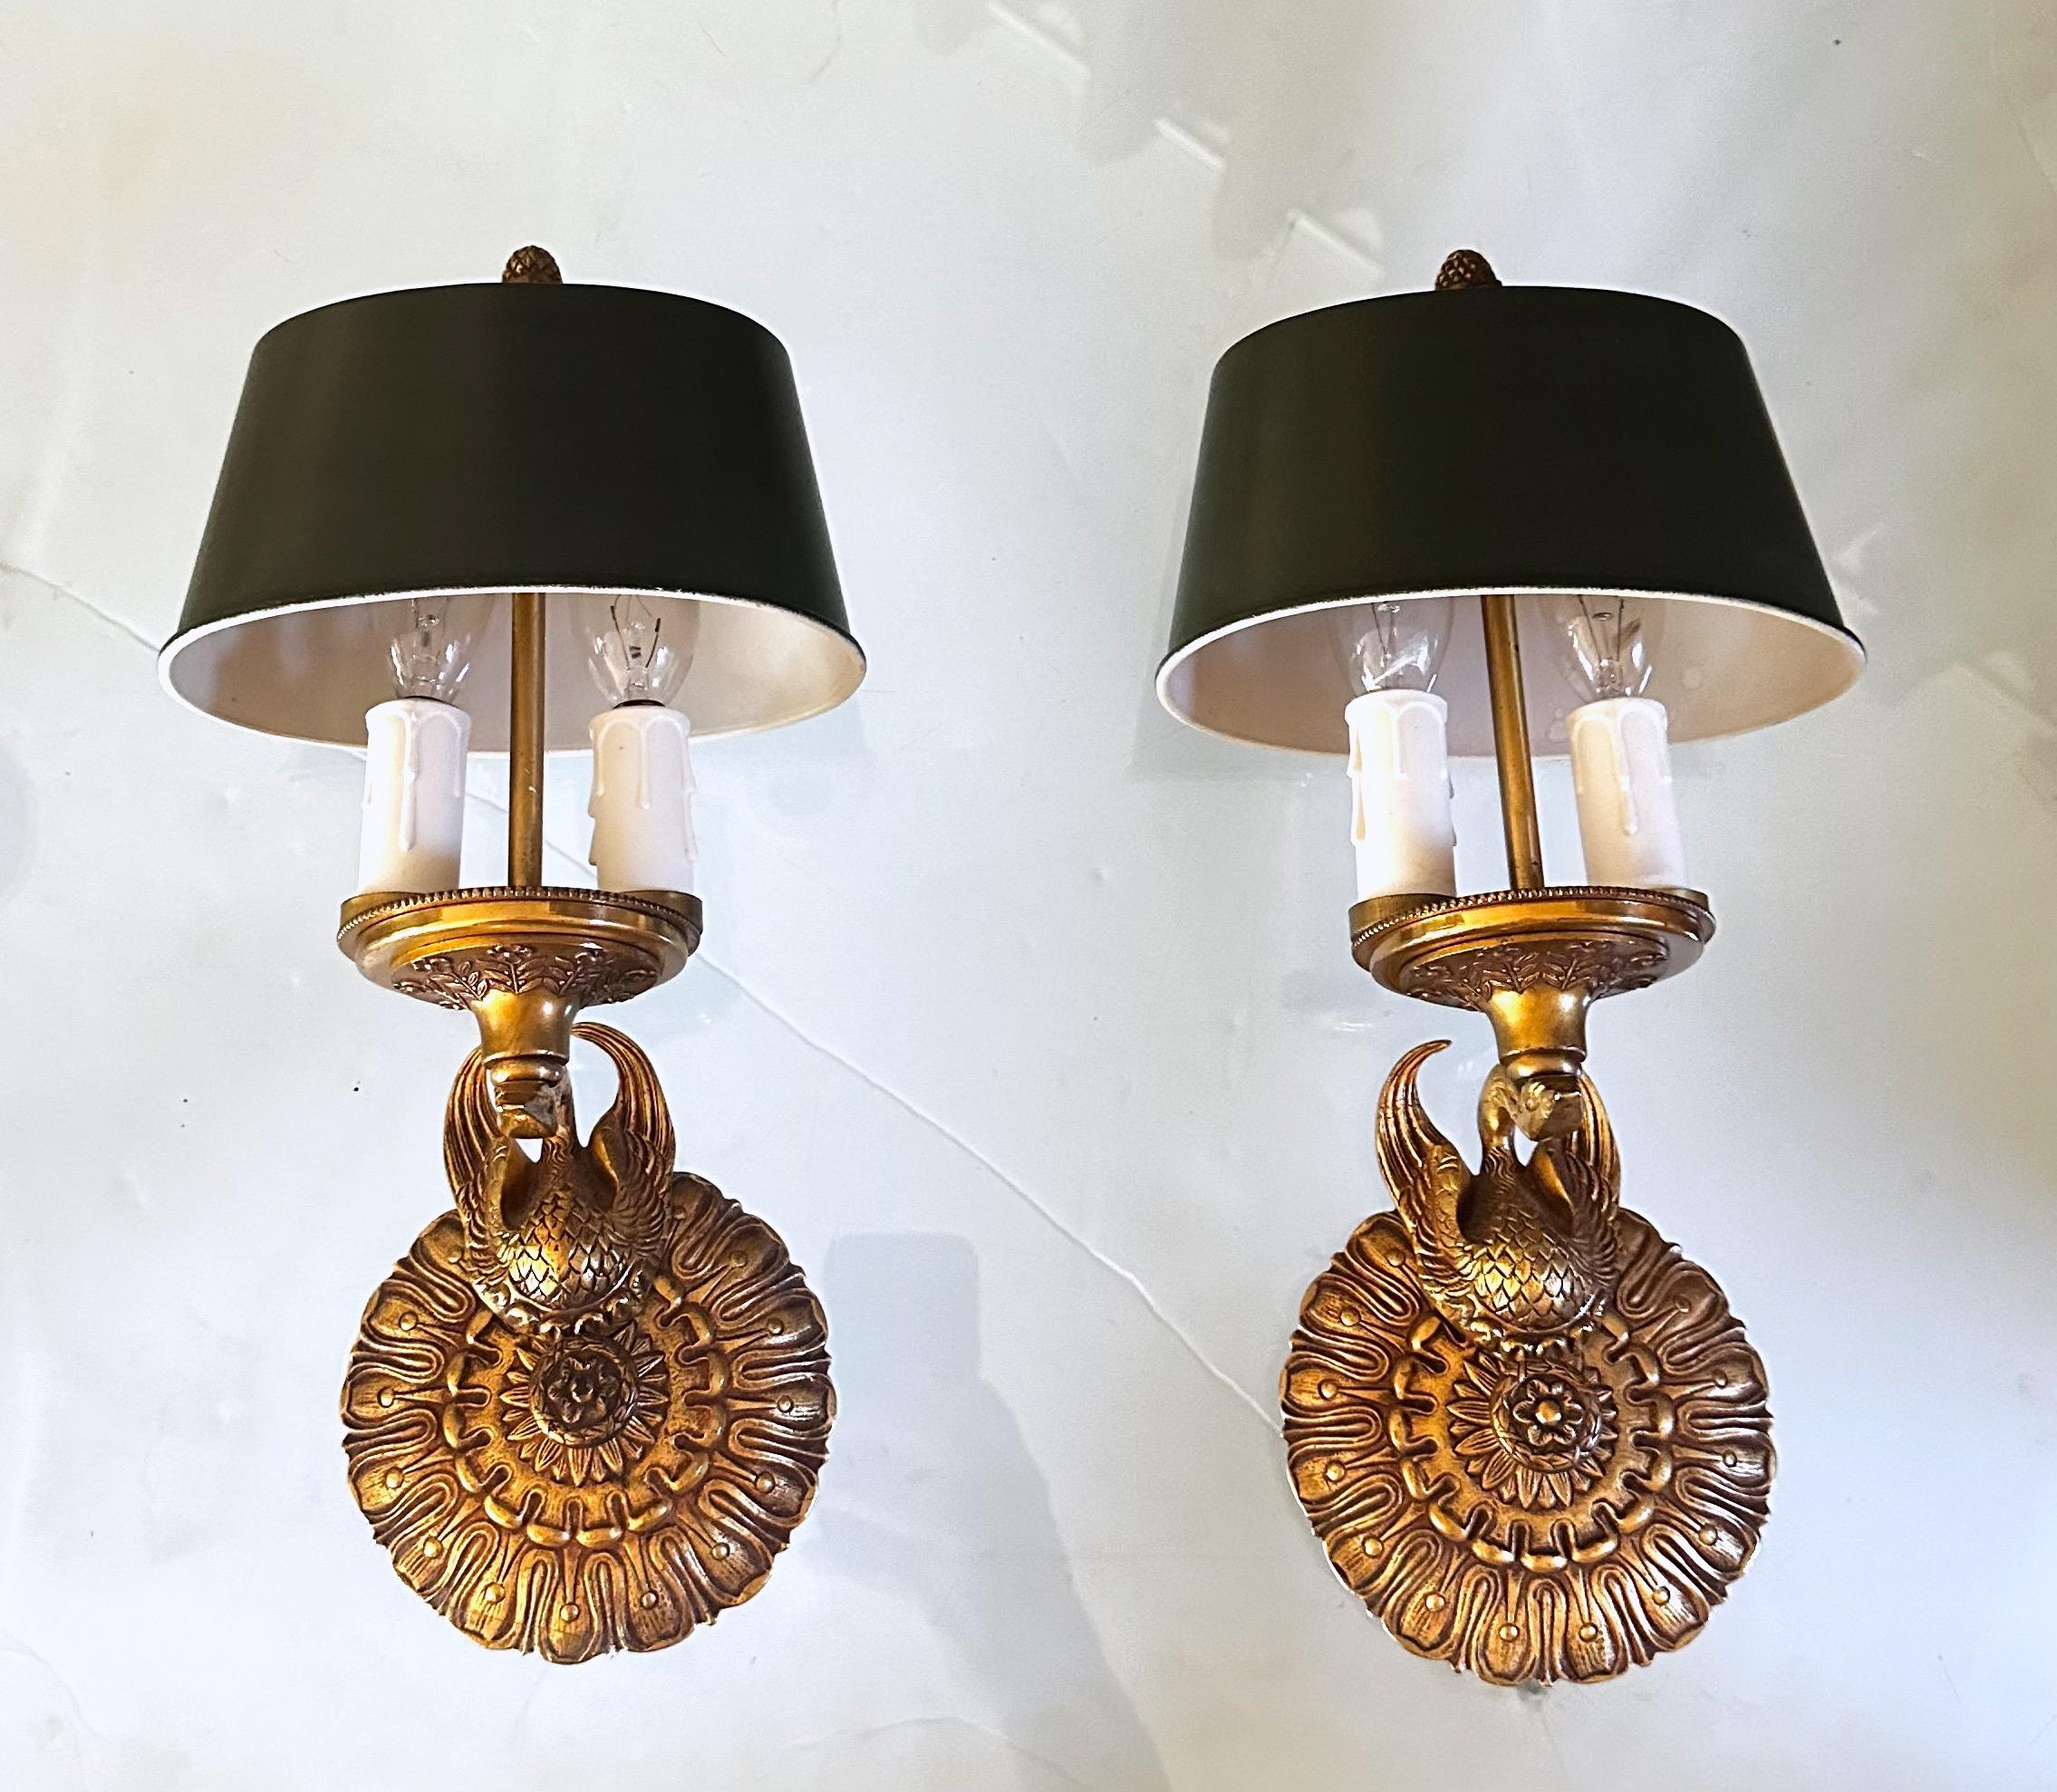 Pair of French Empire style bronze or brass wall sconces with green painted tole metal shades. Expertly executed with fine detailing including swan motif. Each sconce uses 2 candelabra size bulb.